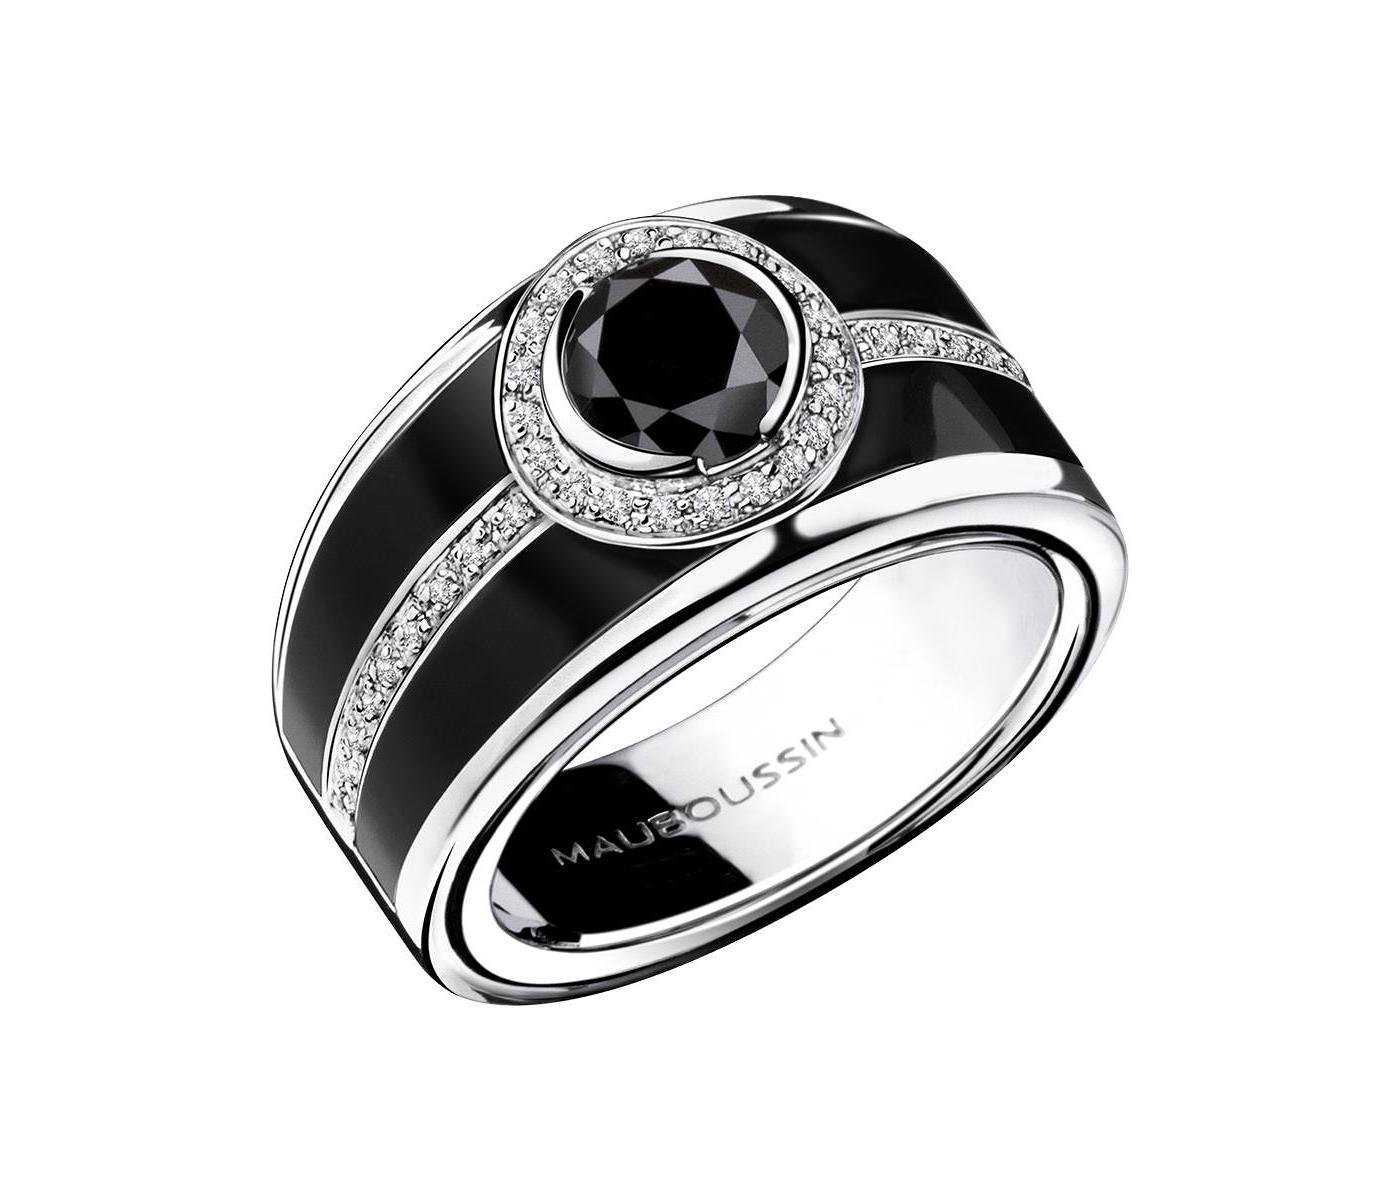 Ring by Mauboussin